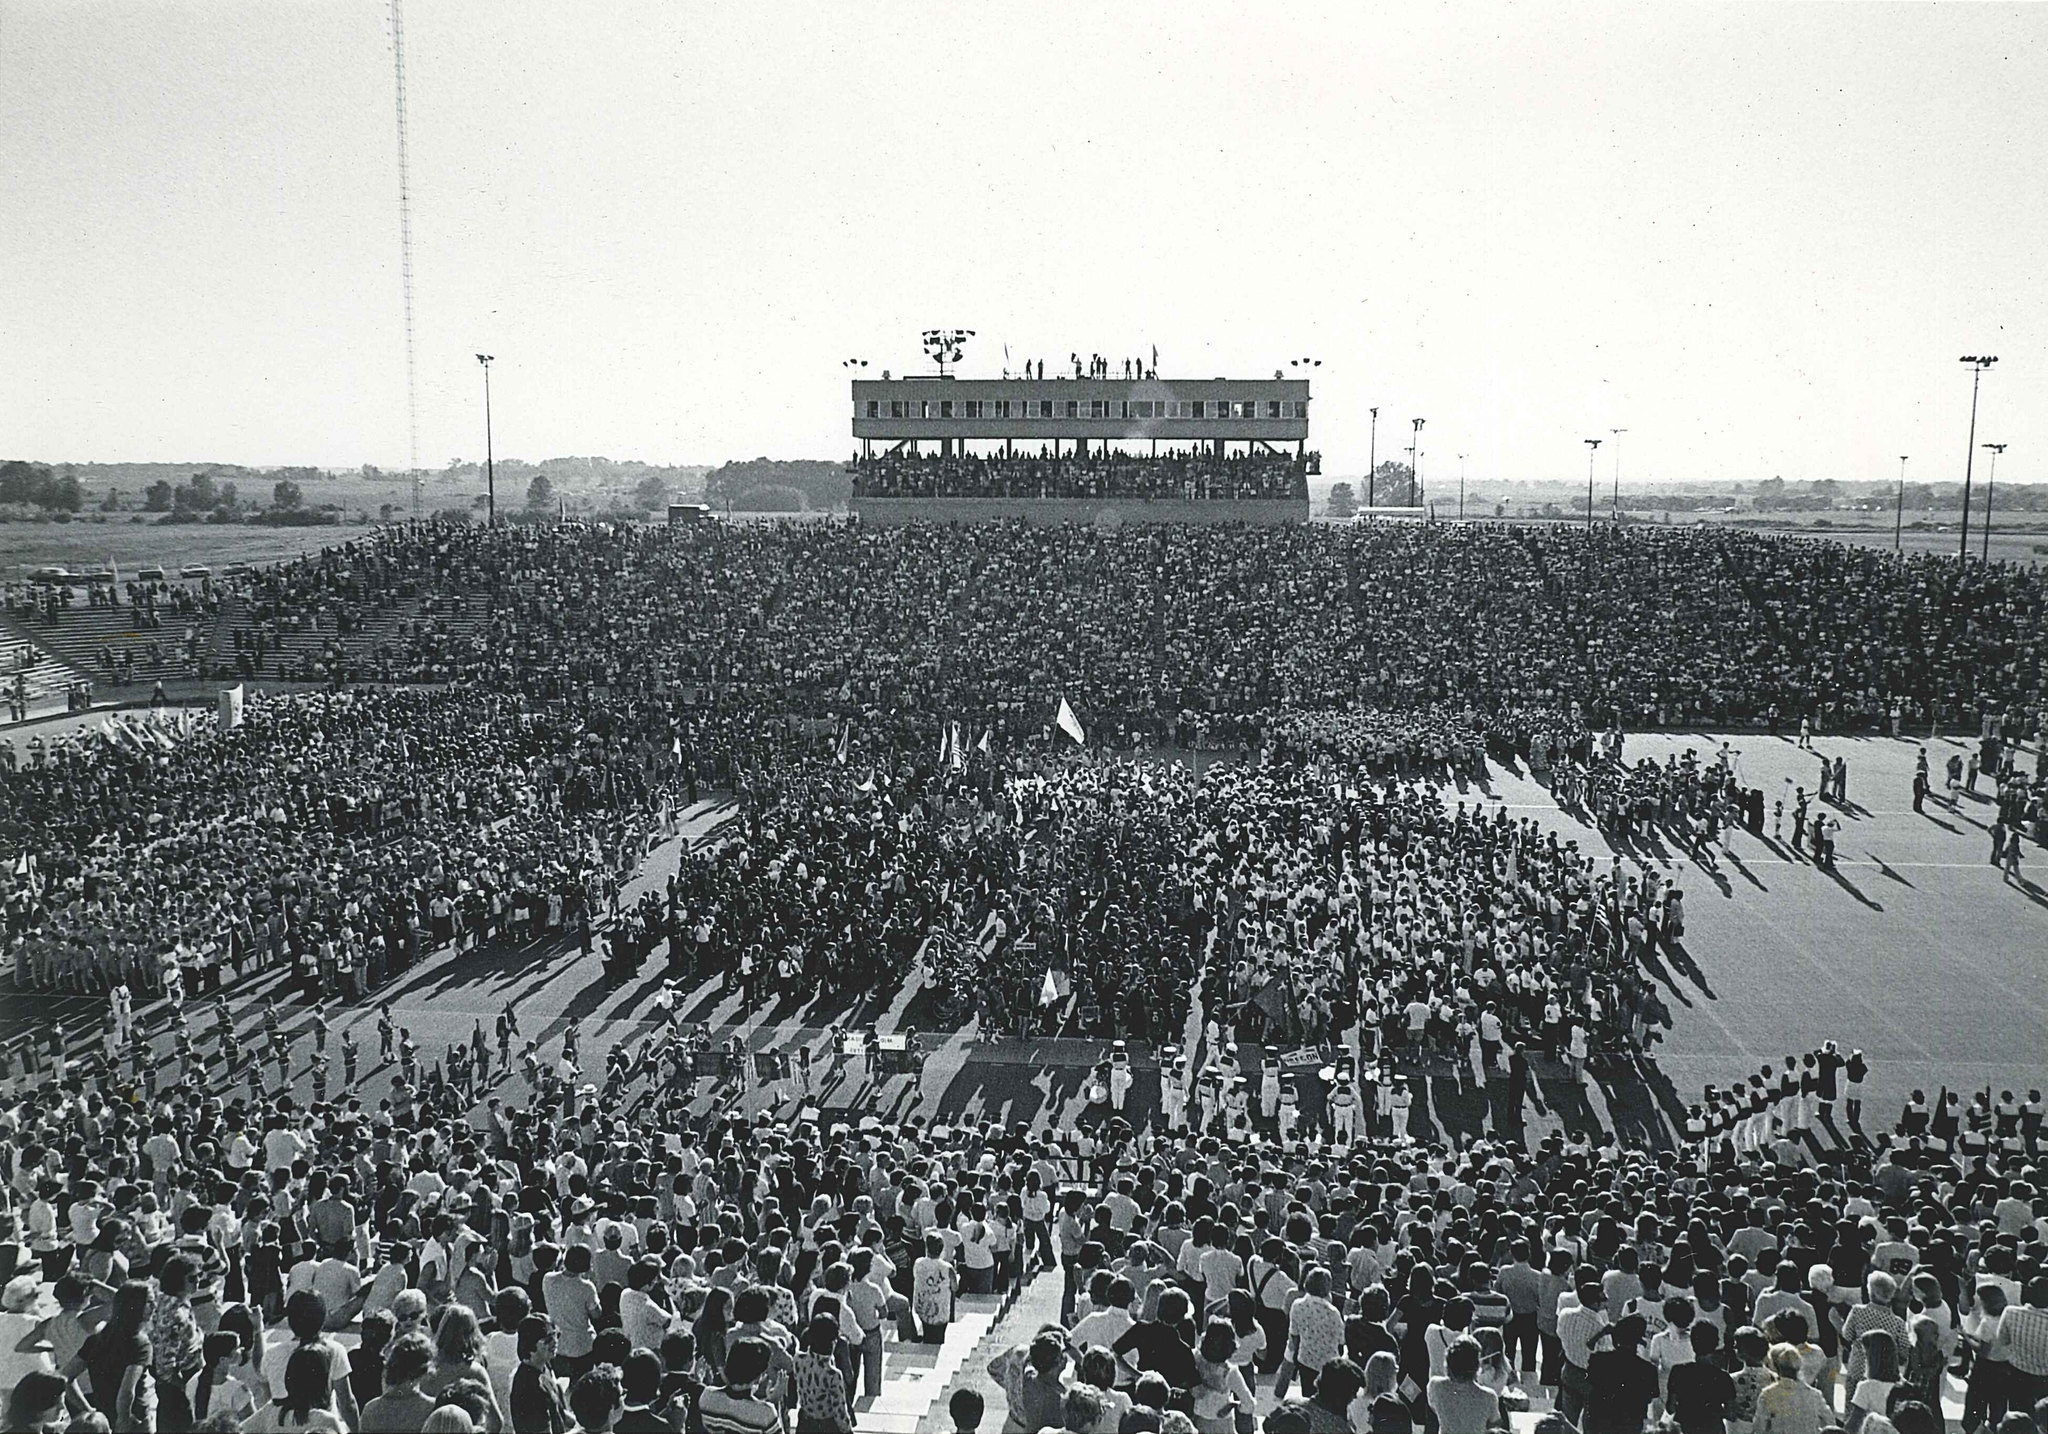 A crowd view of the 1975 World Games at Central Michigan University